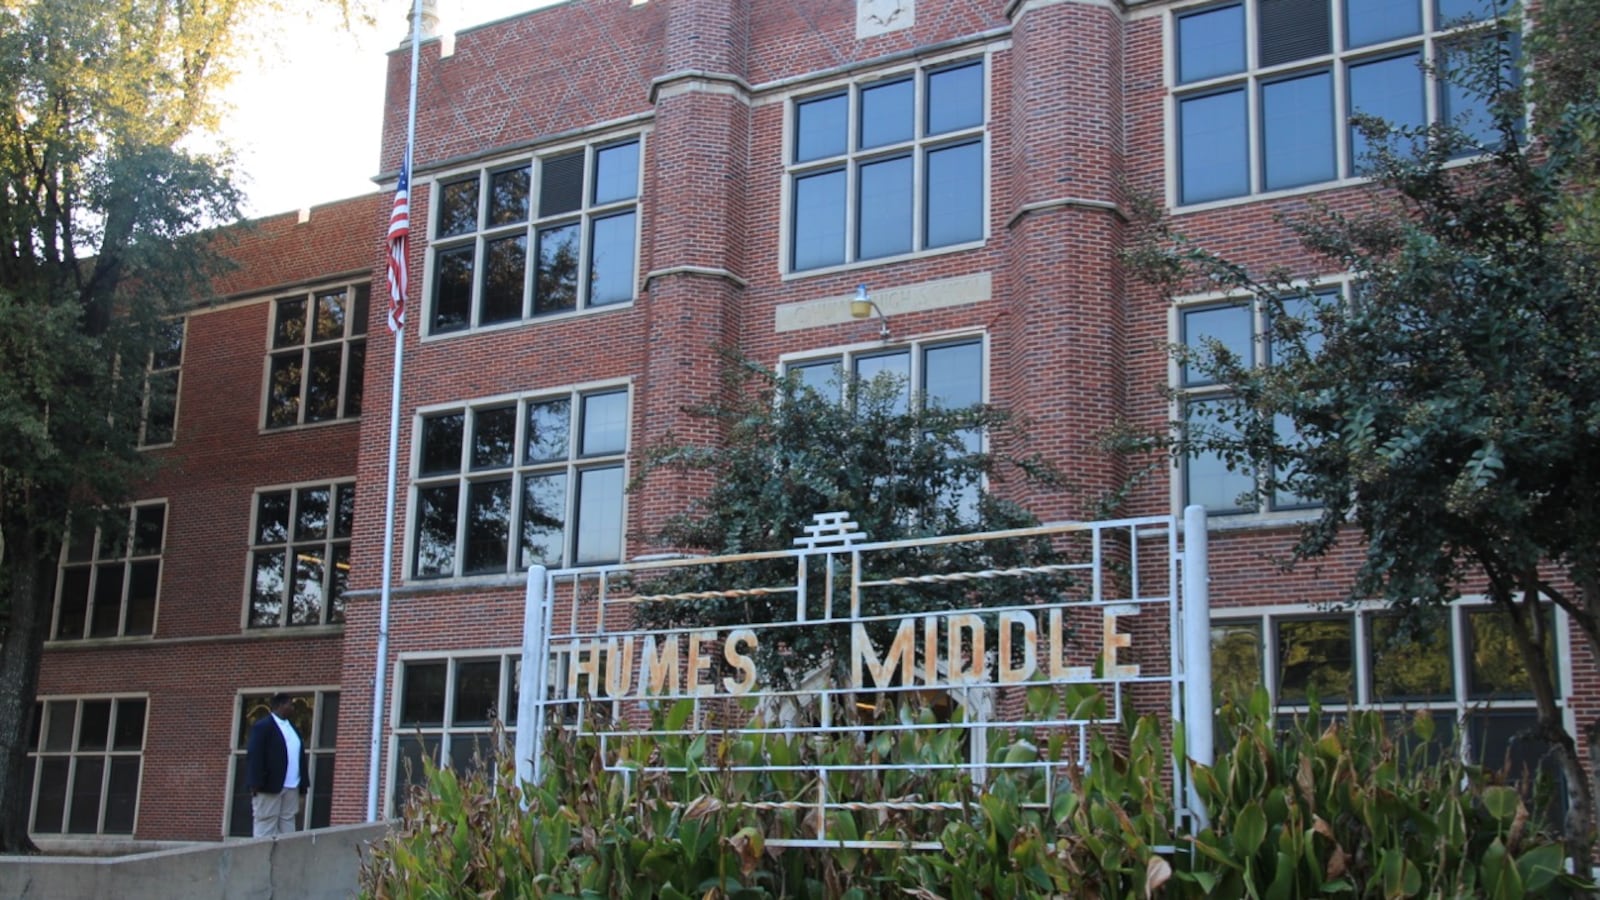 A metal sign that reads "Humes Middle" sits outside of a tall, red brick building with greenery and trees in the foreground and on the sides.